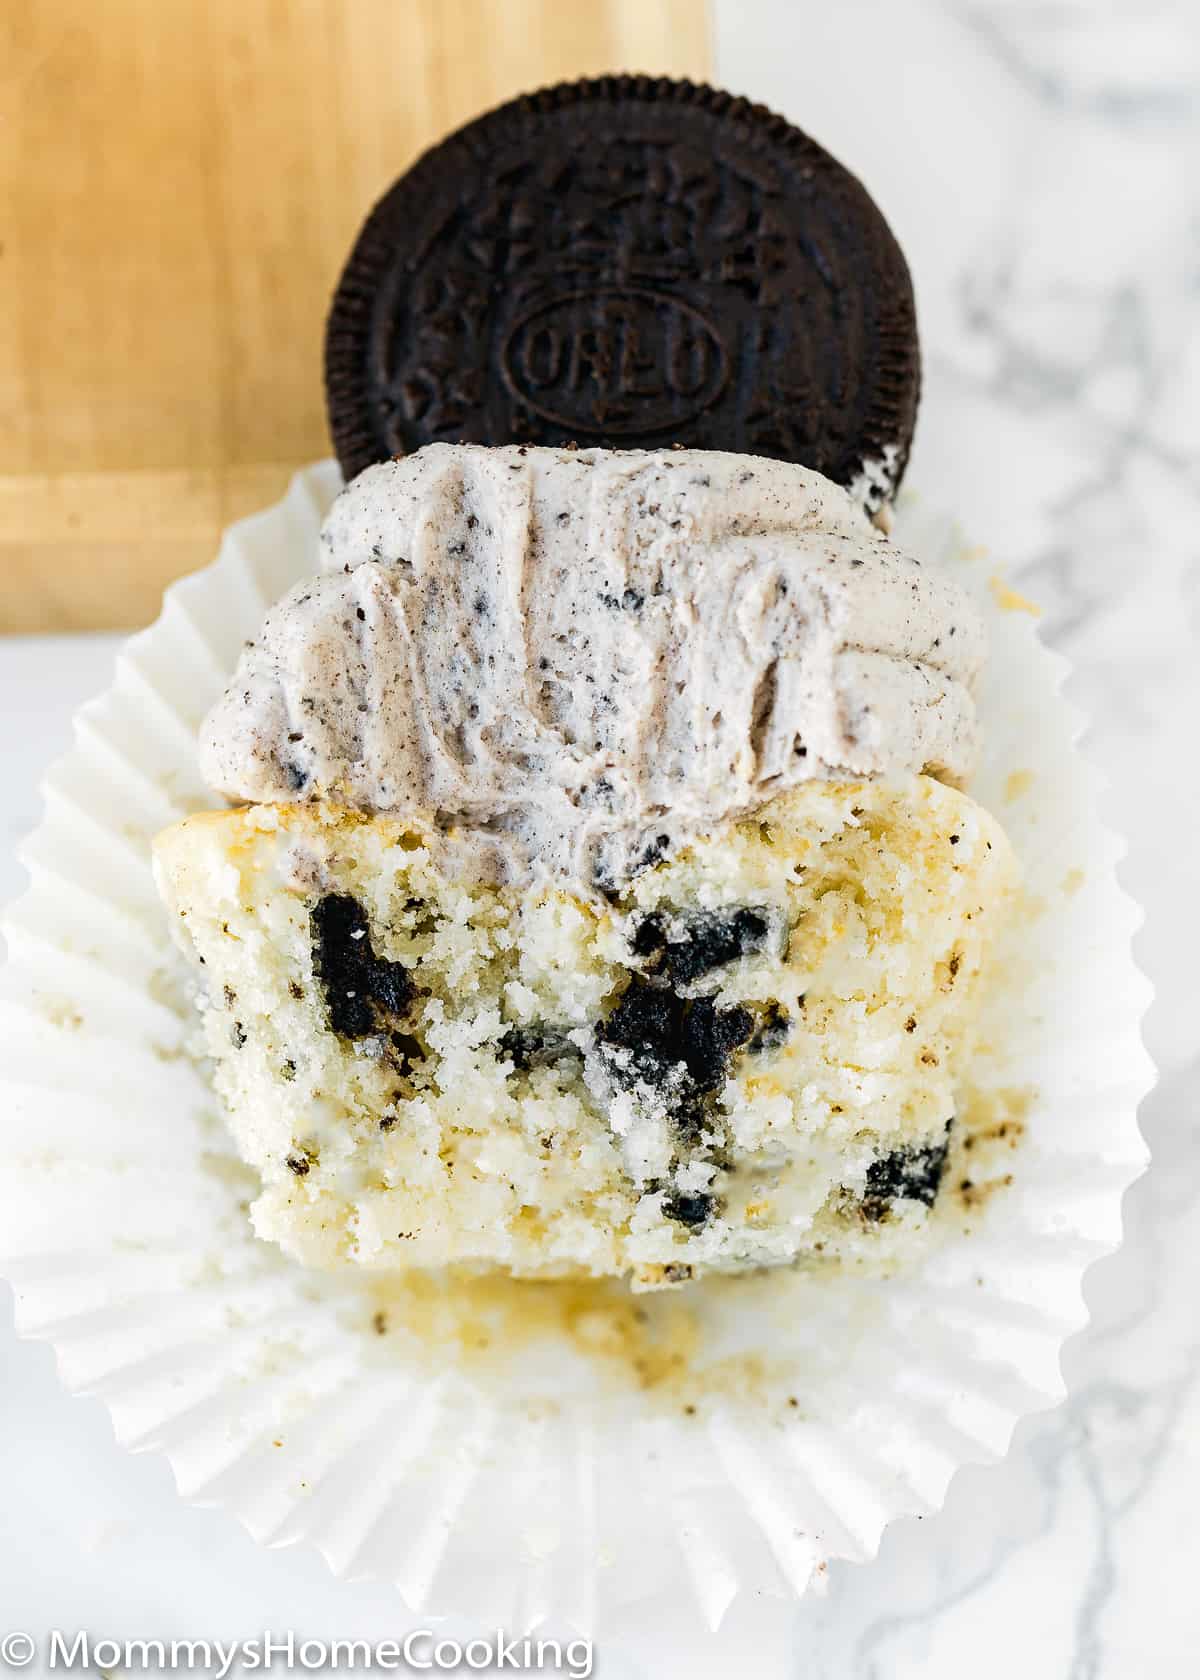 eggless oreo cupcakes bitten showing its interior fluffy texture.